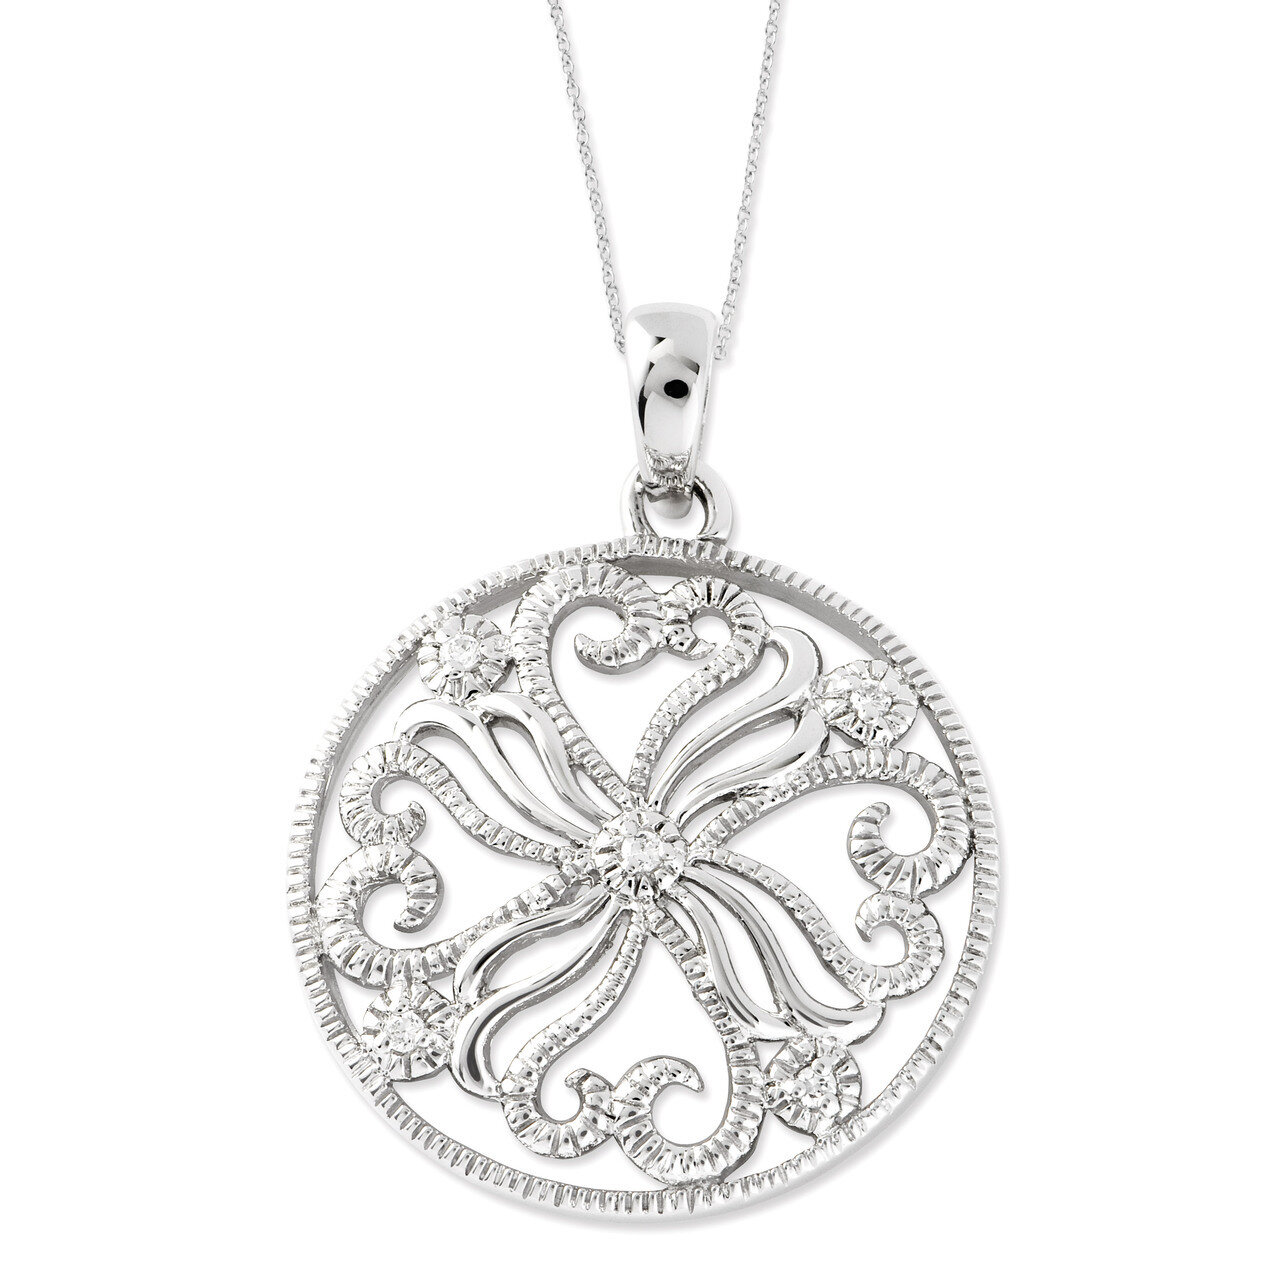 Kindred Spirit 18 Inch Swirls Necklace Sterling Silver with Diamonds QSX452